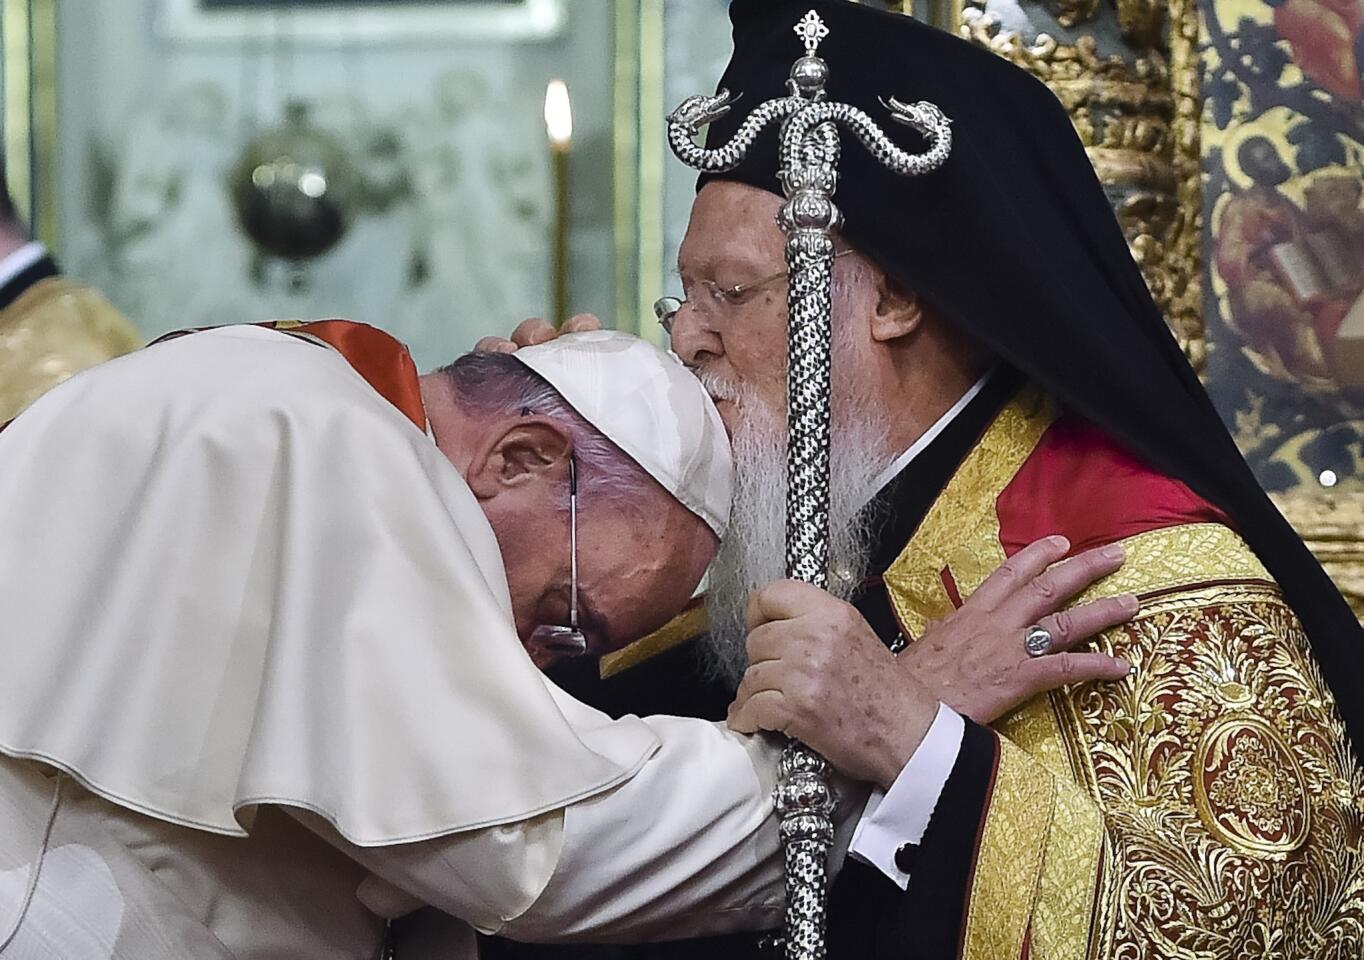 Ecumenical Patriarch Bartholomew I kisses Pope Francis' head during an ecumenical prayer at the Patriarchal Church of St. George in Istanbul in November.